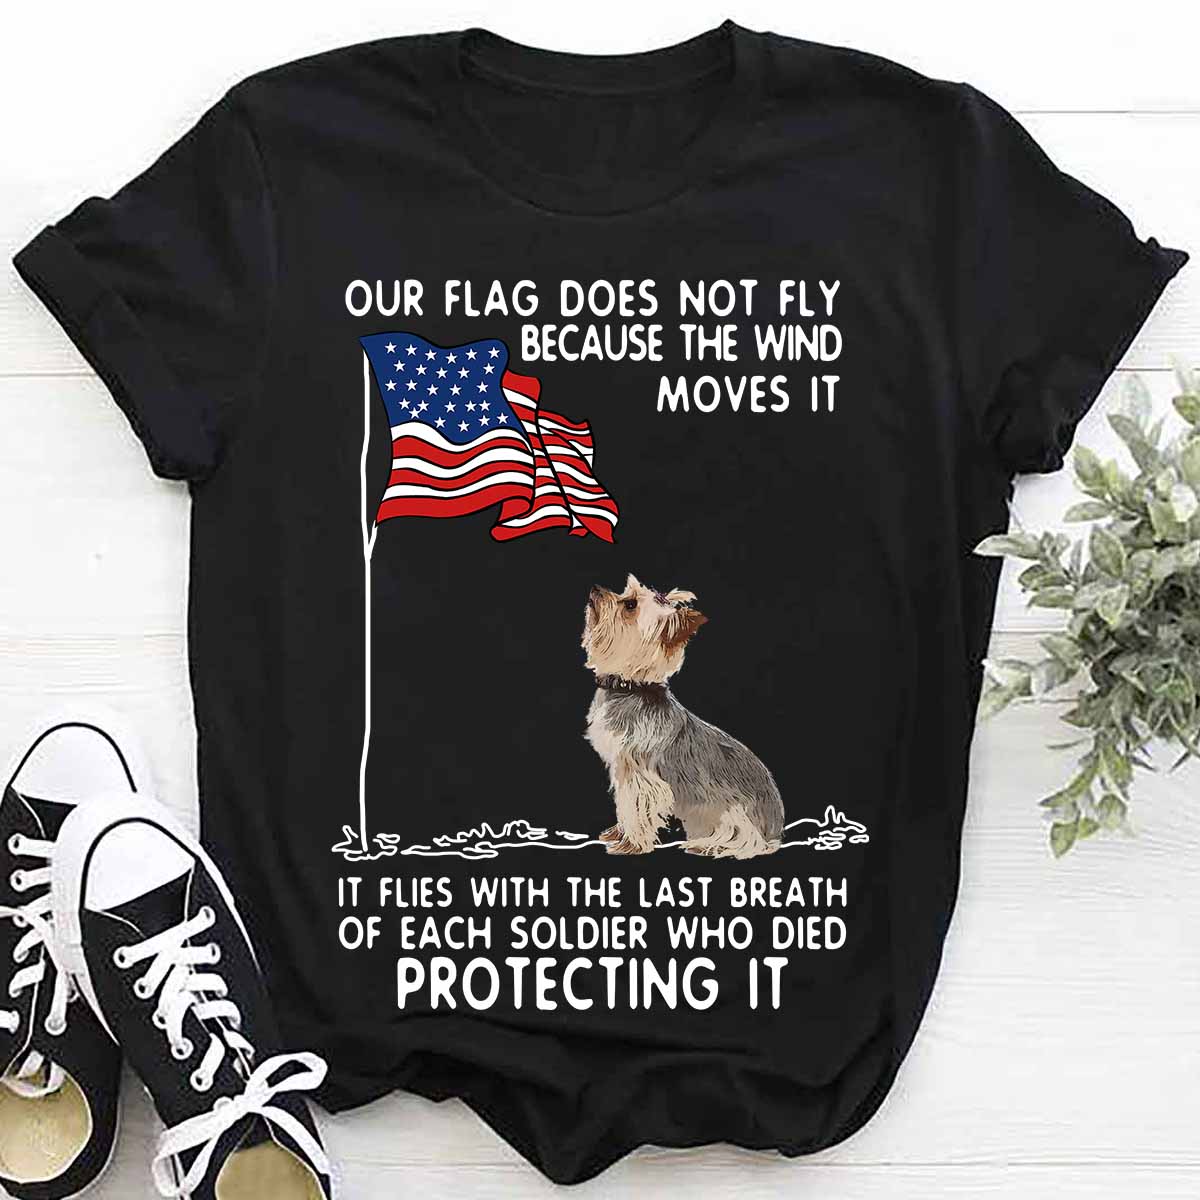 Our flag does not fly because the wind moves it - America flag, Shih Tzu dog, dog lover